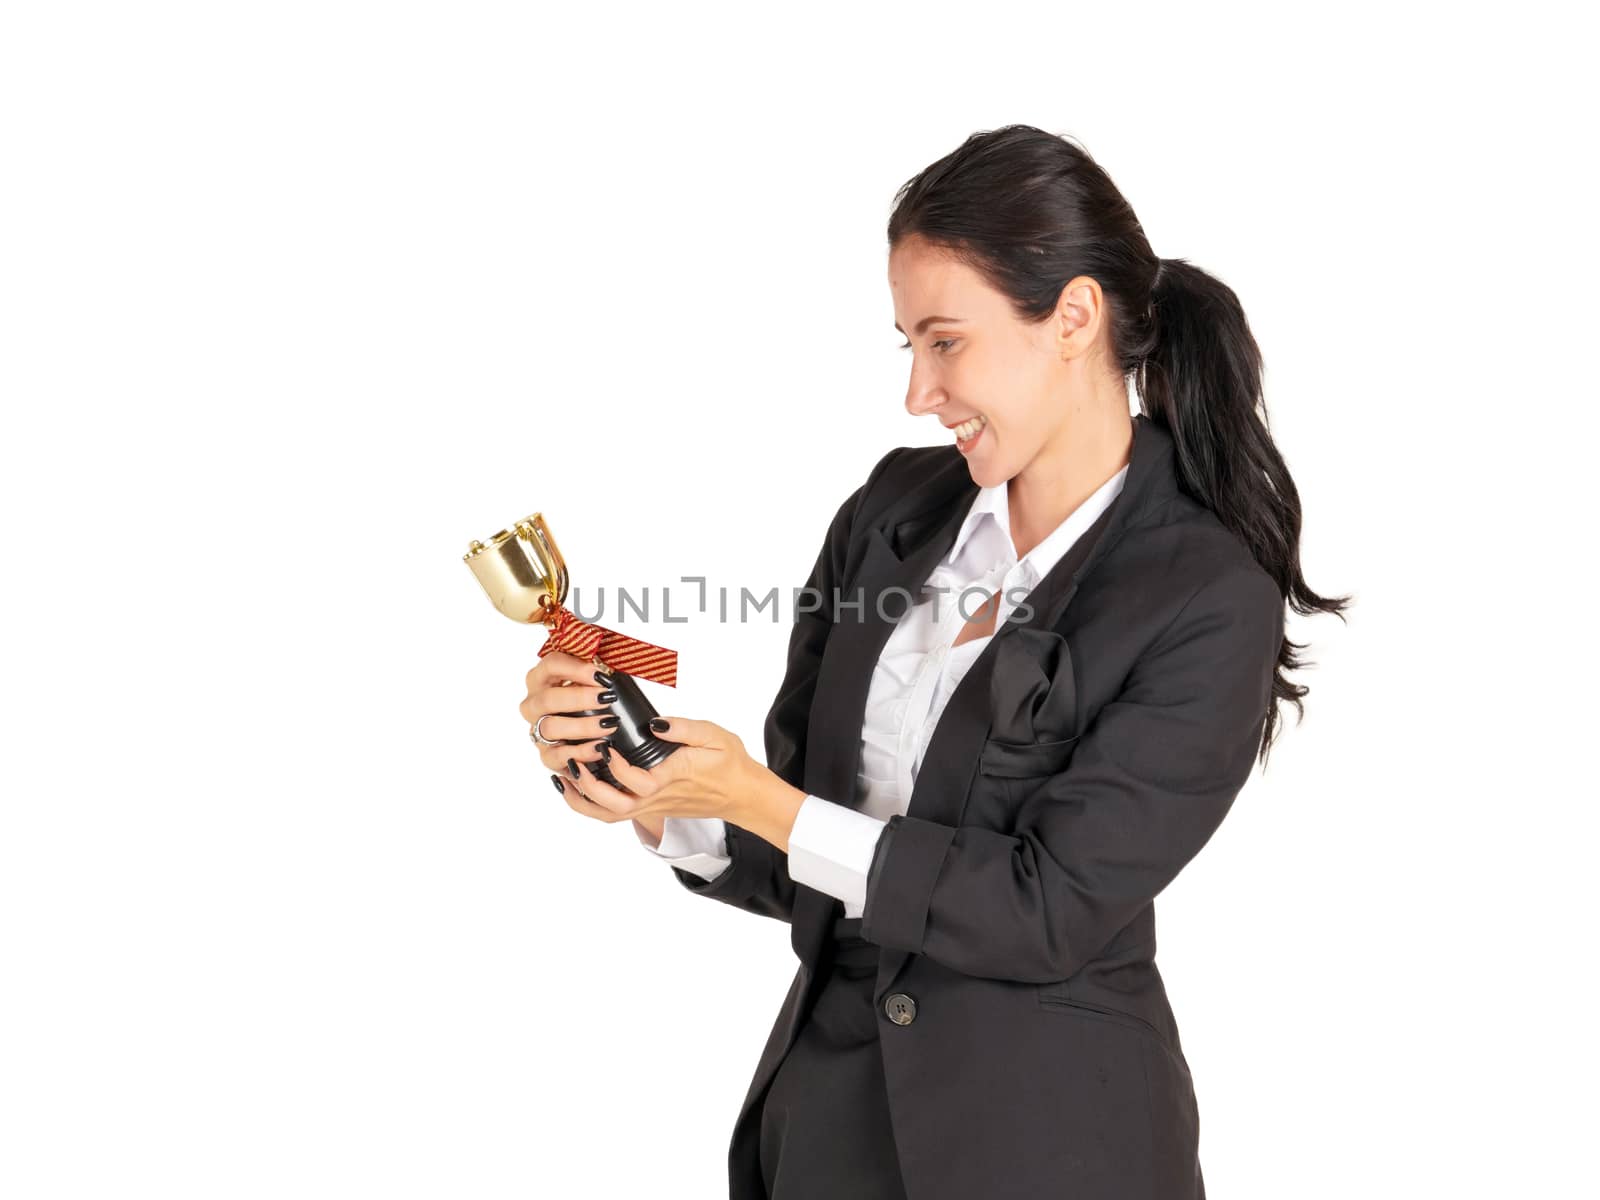 A businesswoman in a black suit with a smile looking at the trophy received from the work done proudly. Portrait on white background with studio light.